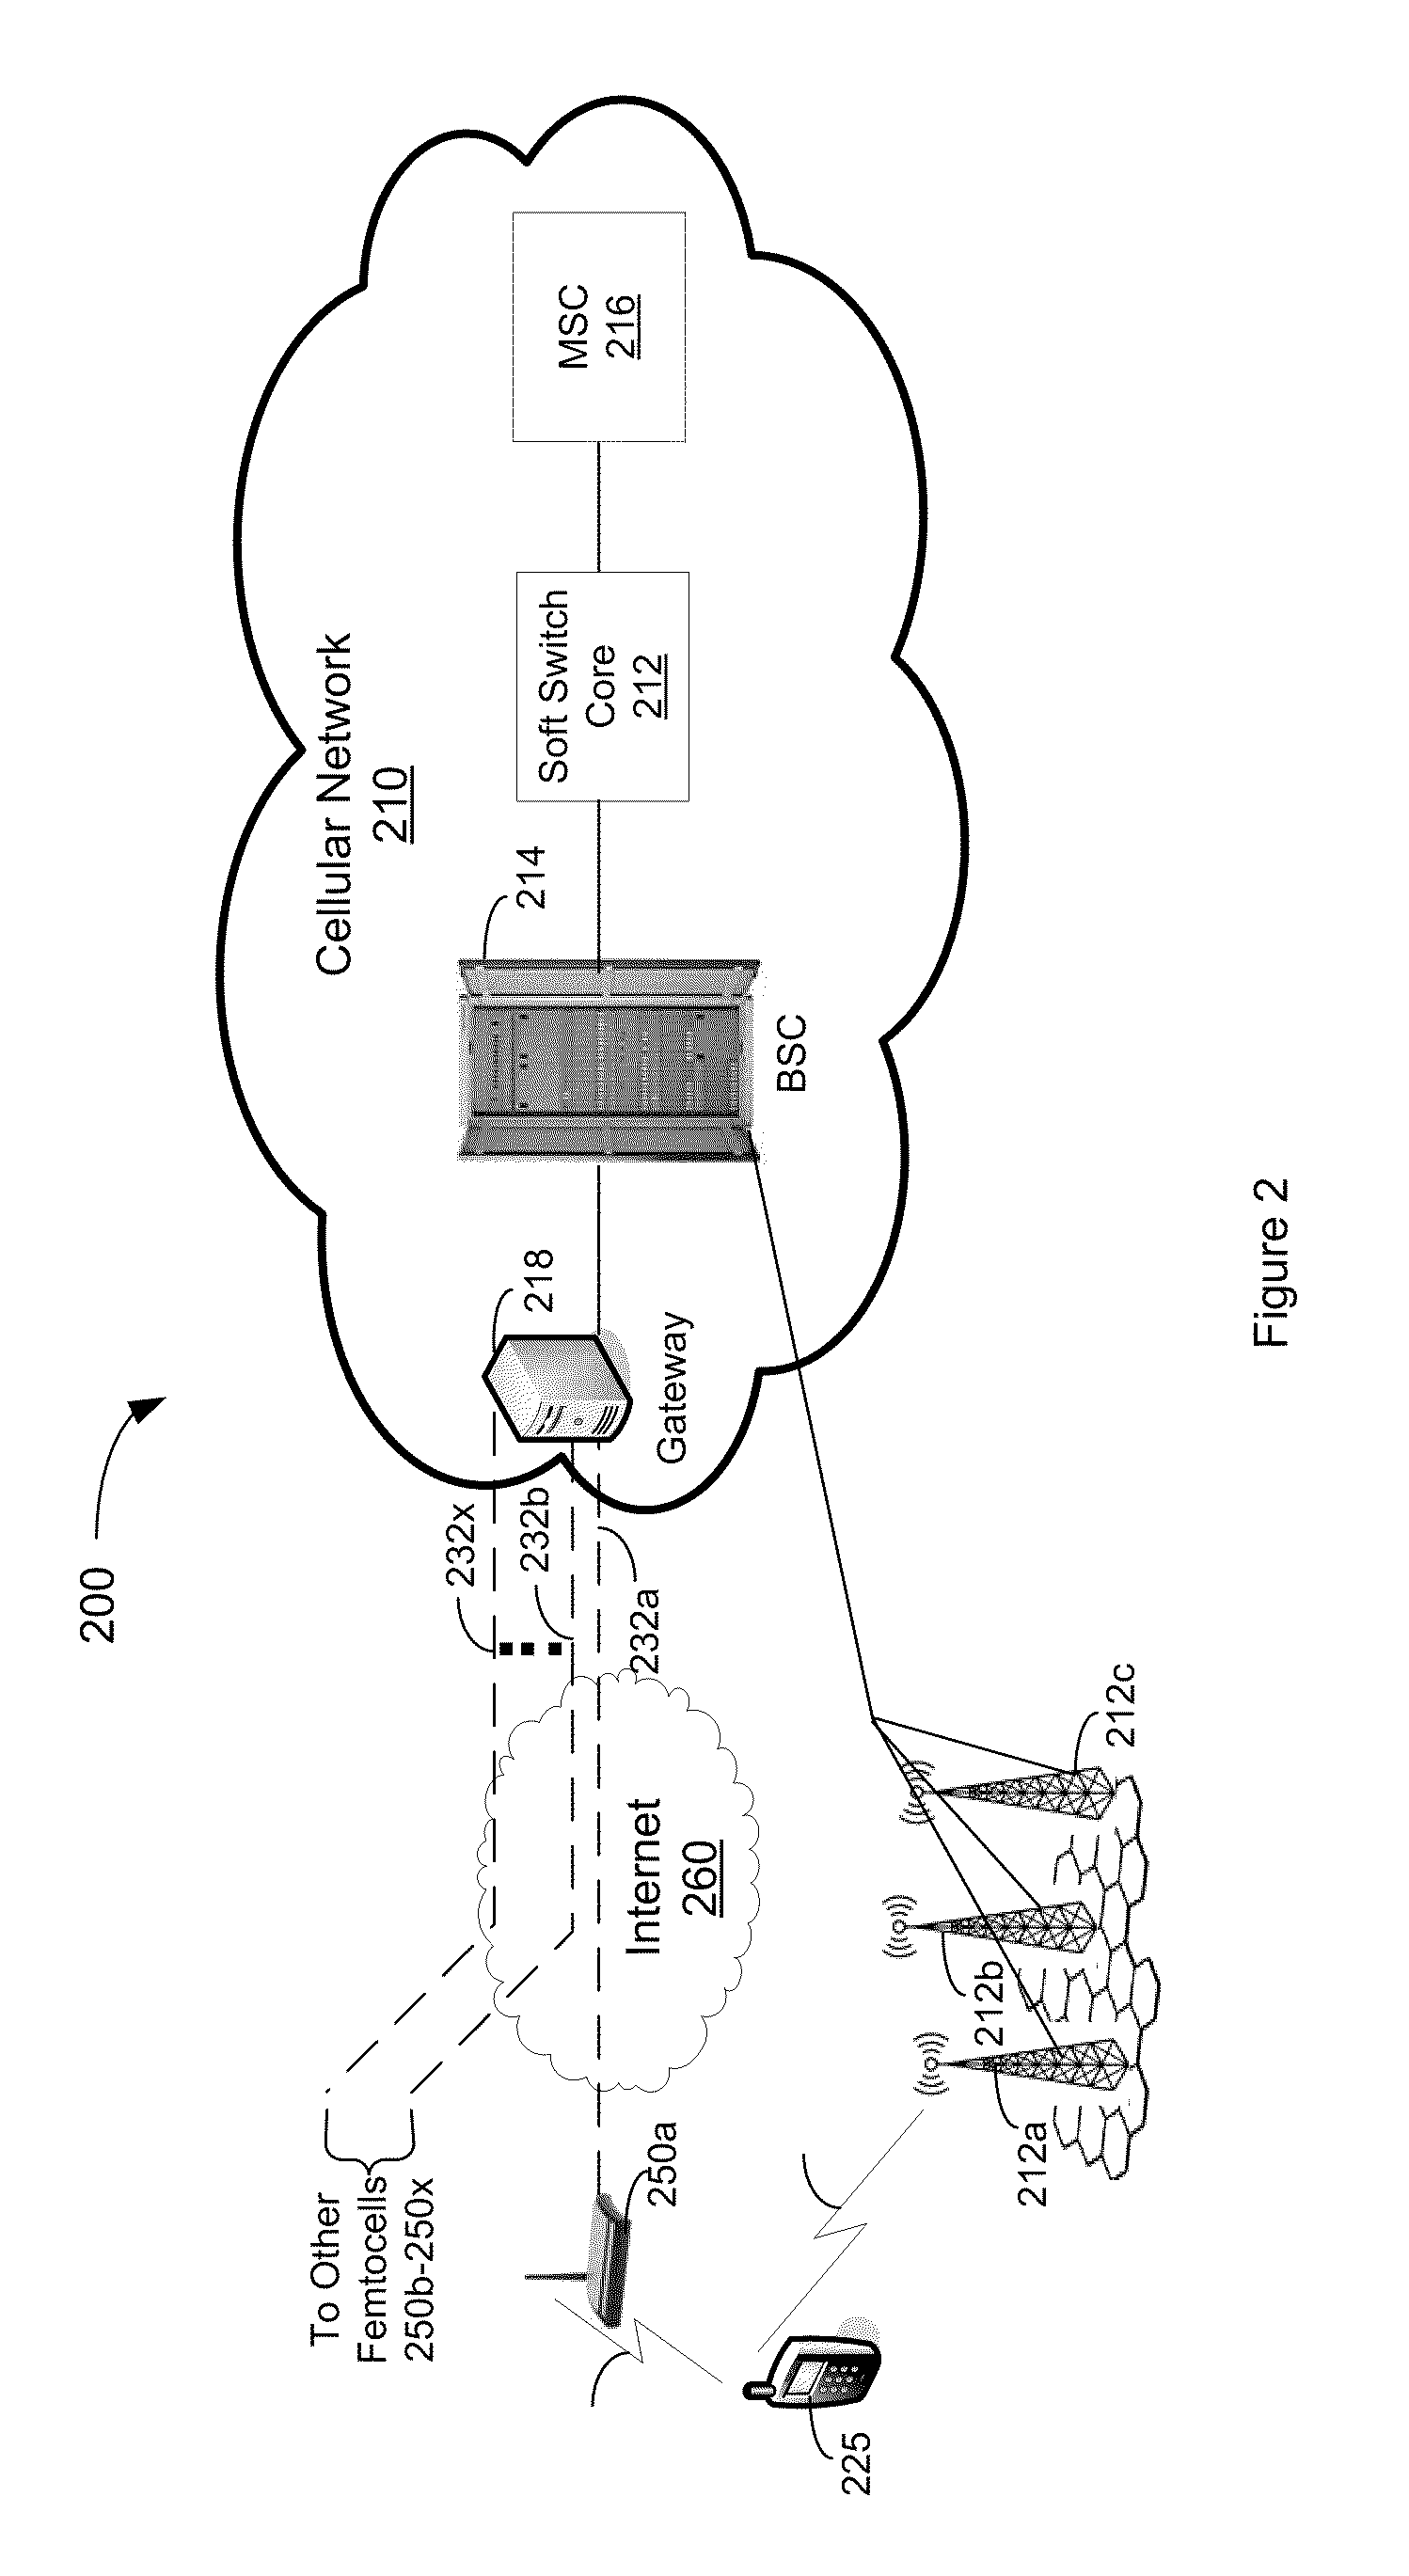 System and method for providing extending femtocell coverage